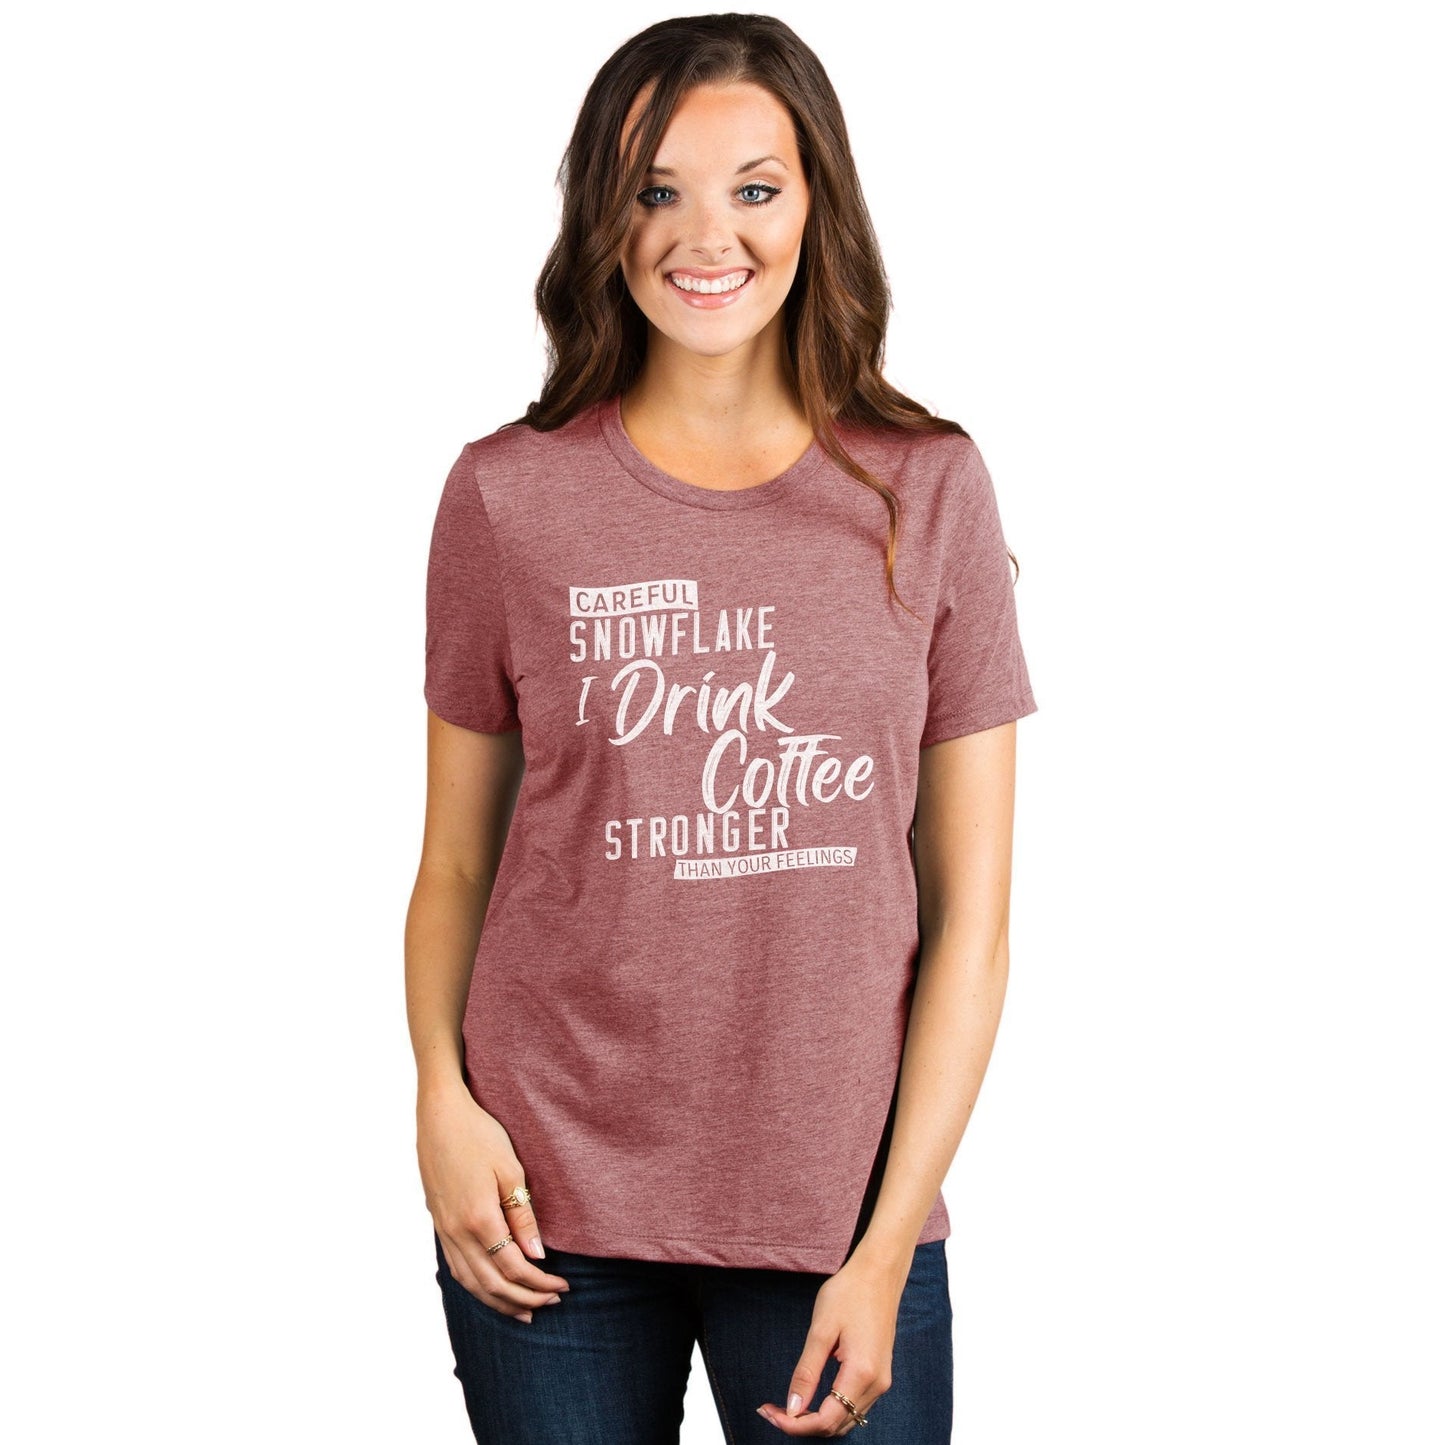 Careful Snowflake...I Drink Coffee Stronger Than Your Feelings Women's Relaxed Crewneck T-Shirt Top Tee Heather Rouge Model
